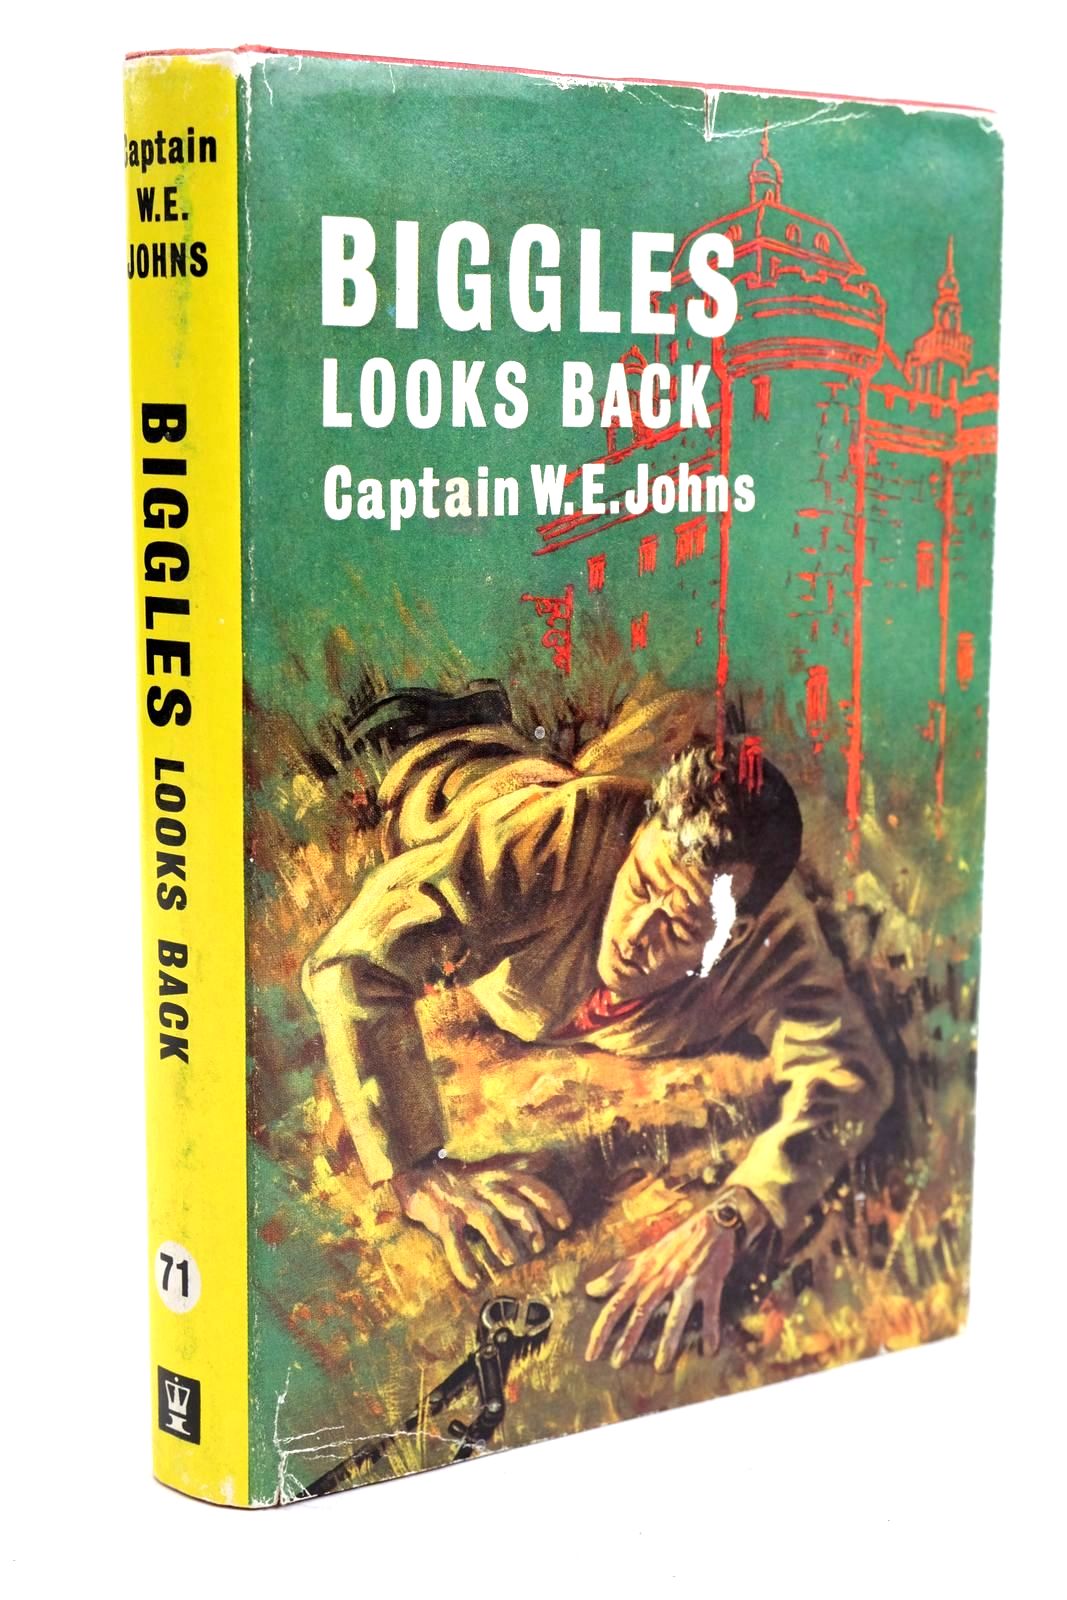 Photo of BIGGLES LOOKS BACK written by Johns, W.E. illustrated by Stead,  published by Hodder &amp; Stoughton (STOCK CODE: 1320553)  for sale by Stella & Rose's Books